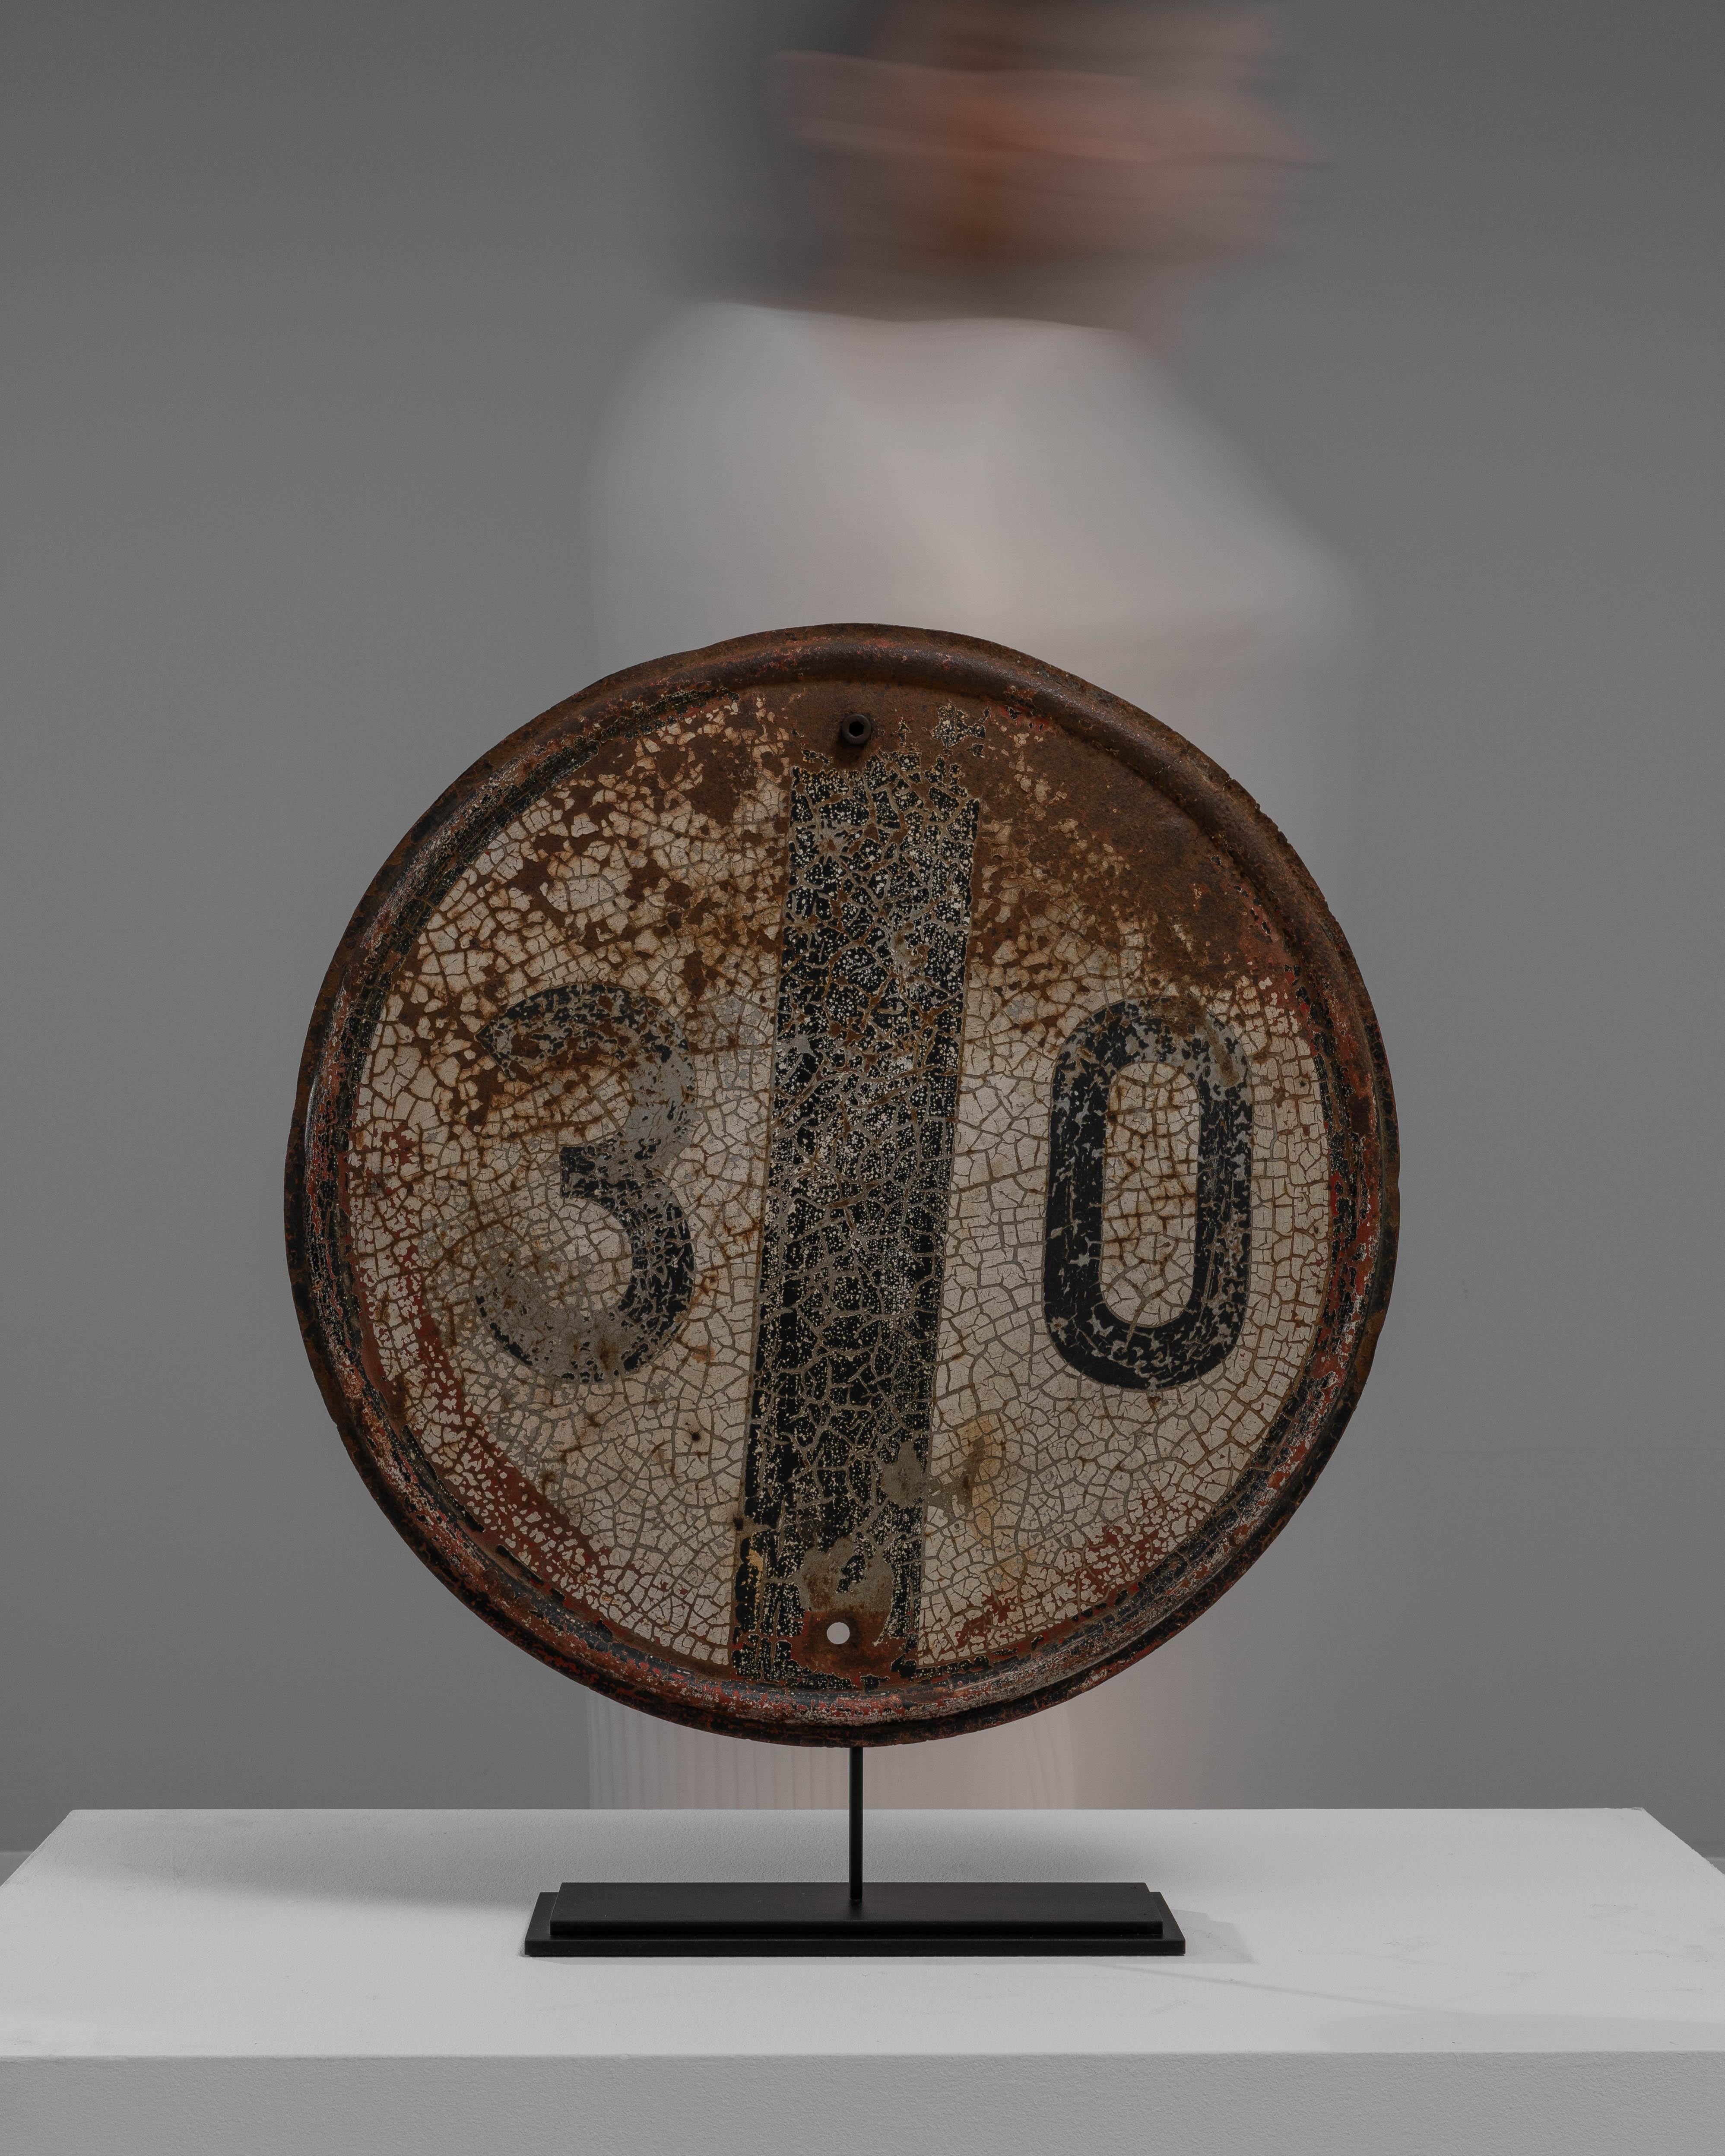 Immerse yourself in the allure of antiquity with this captivating Early 20th Century French Metal Decoration on Stand. A once-functional piece of signage, this circular metal plate carries the charm of a seasoned relic, now repurposed as a